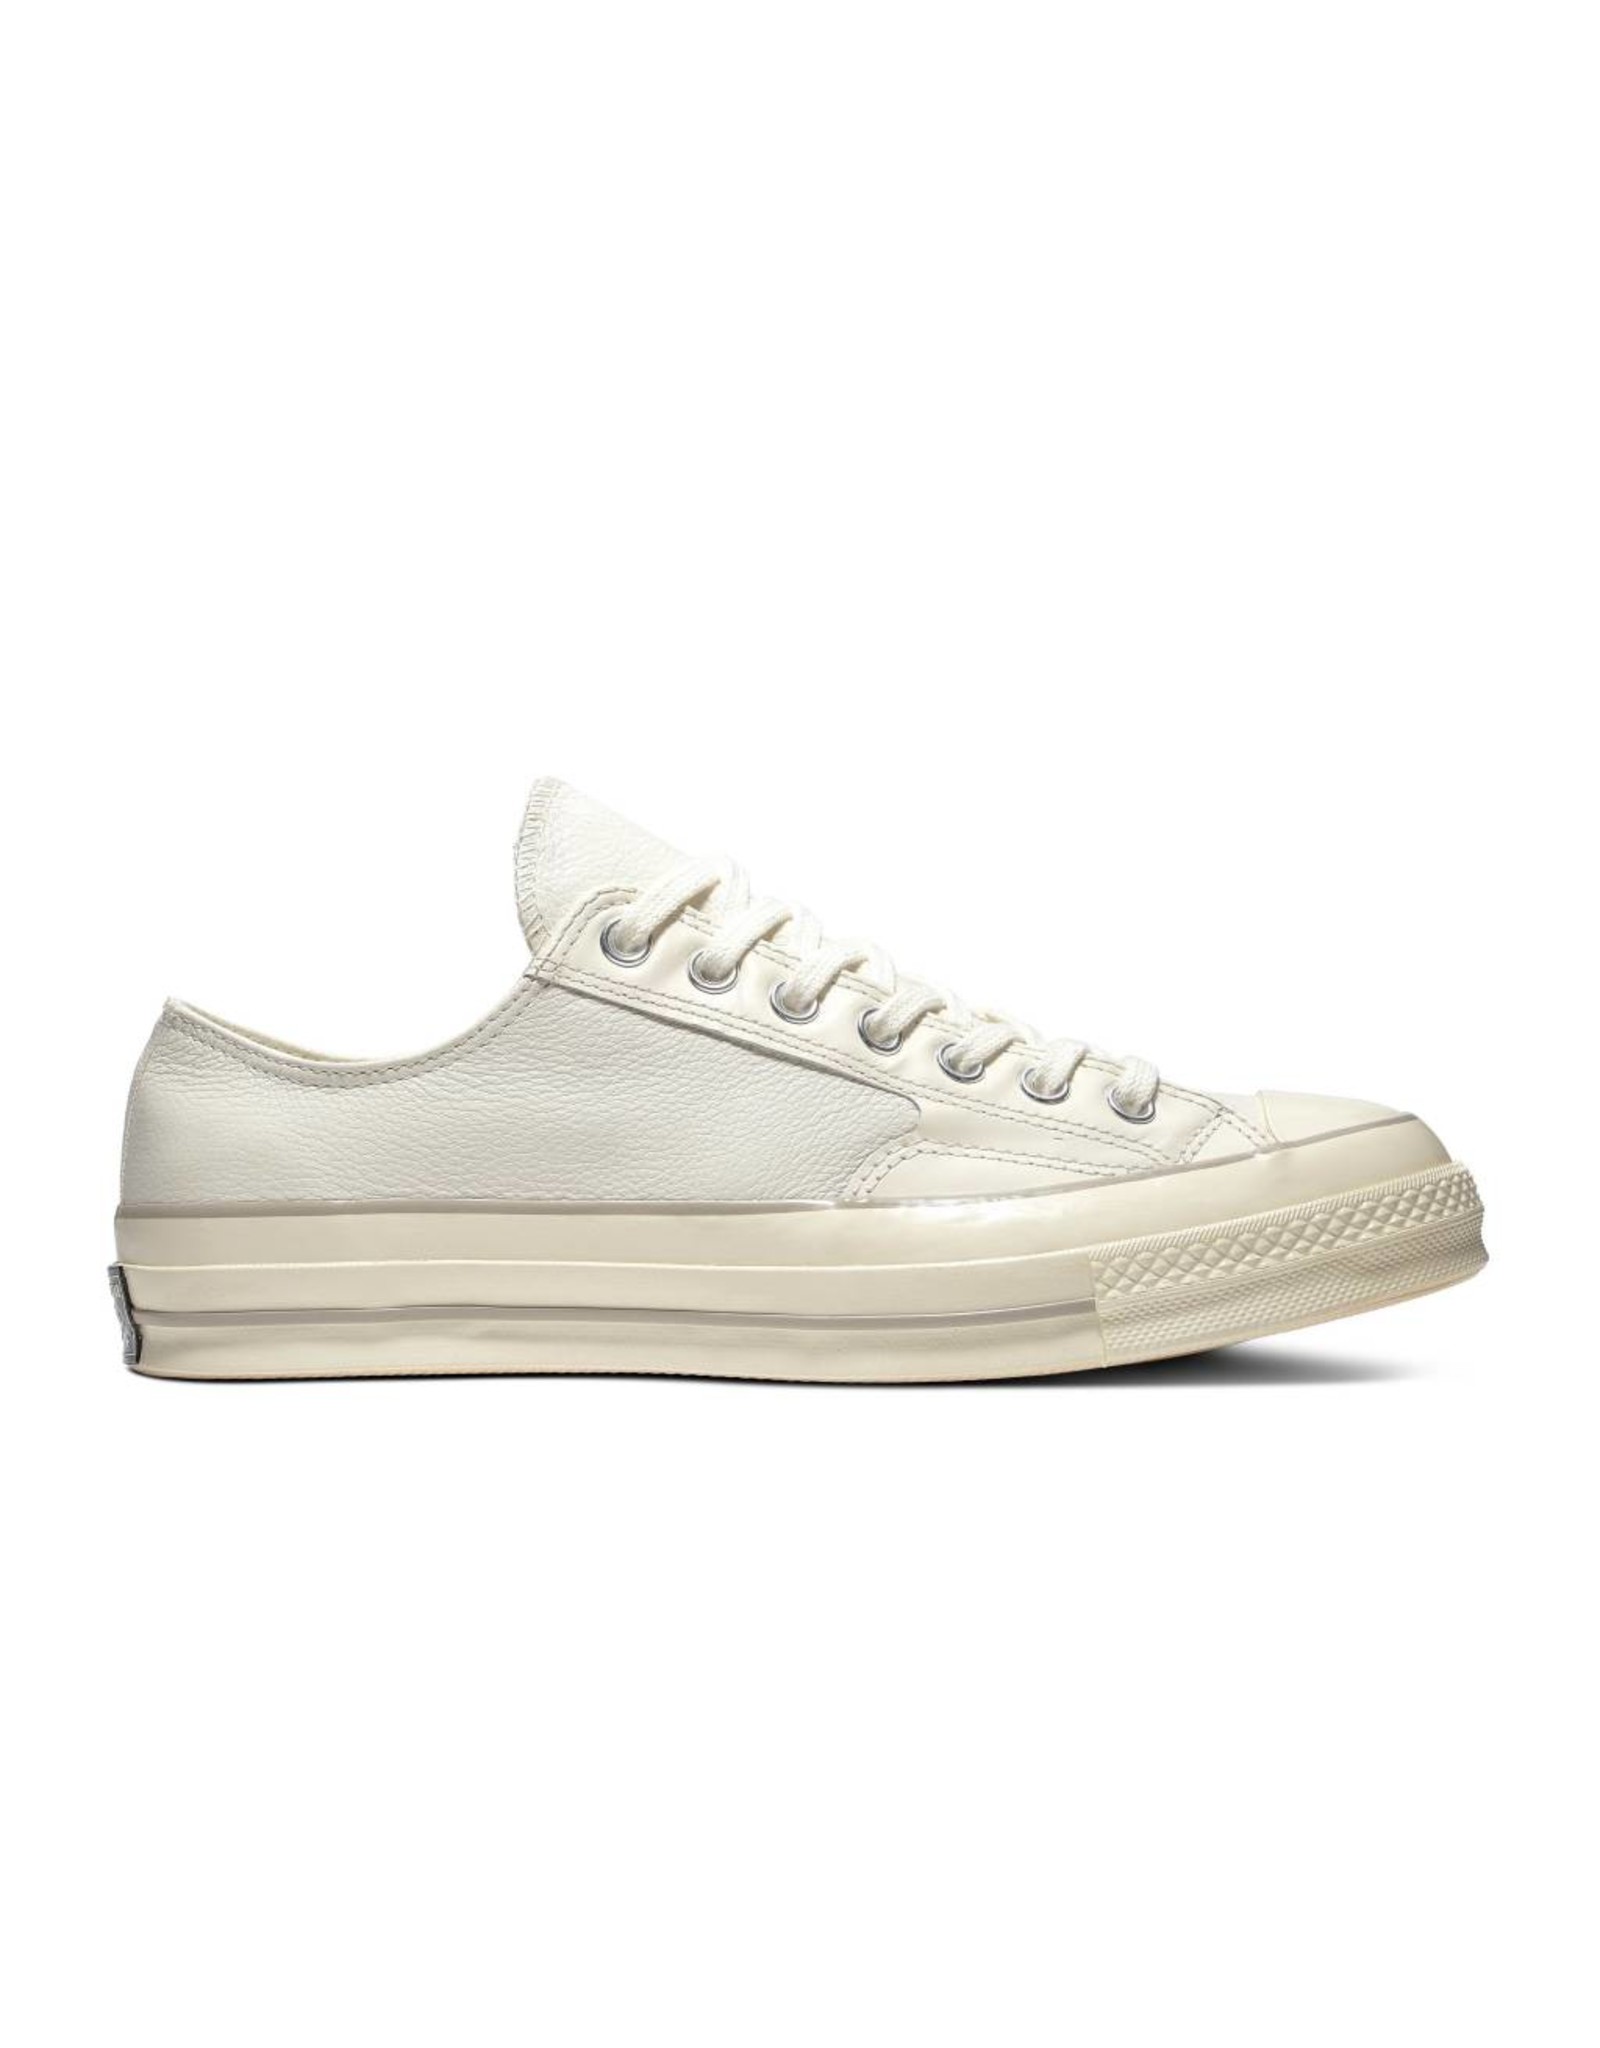 converse chuck taylor 70 ox leather